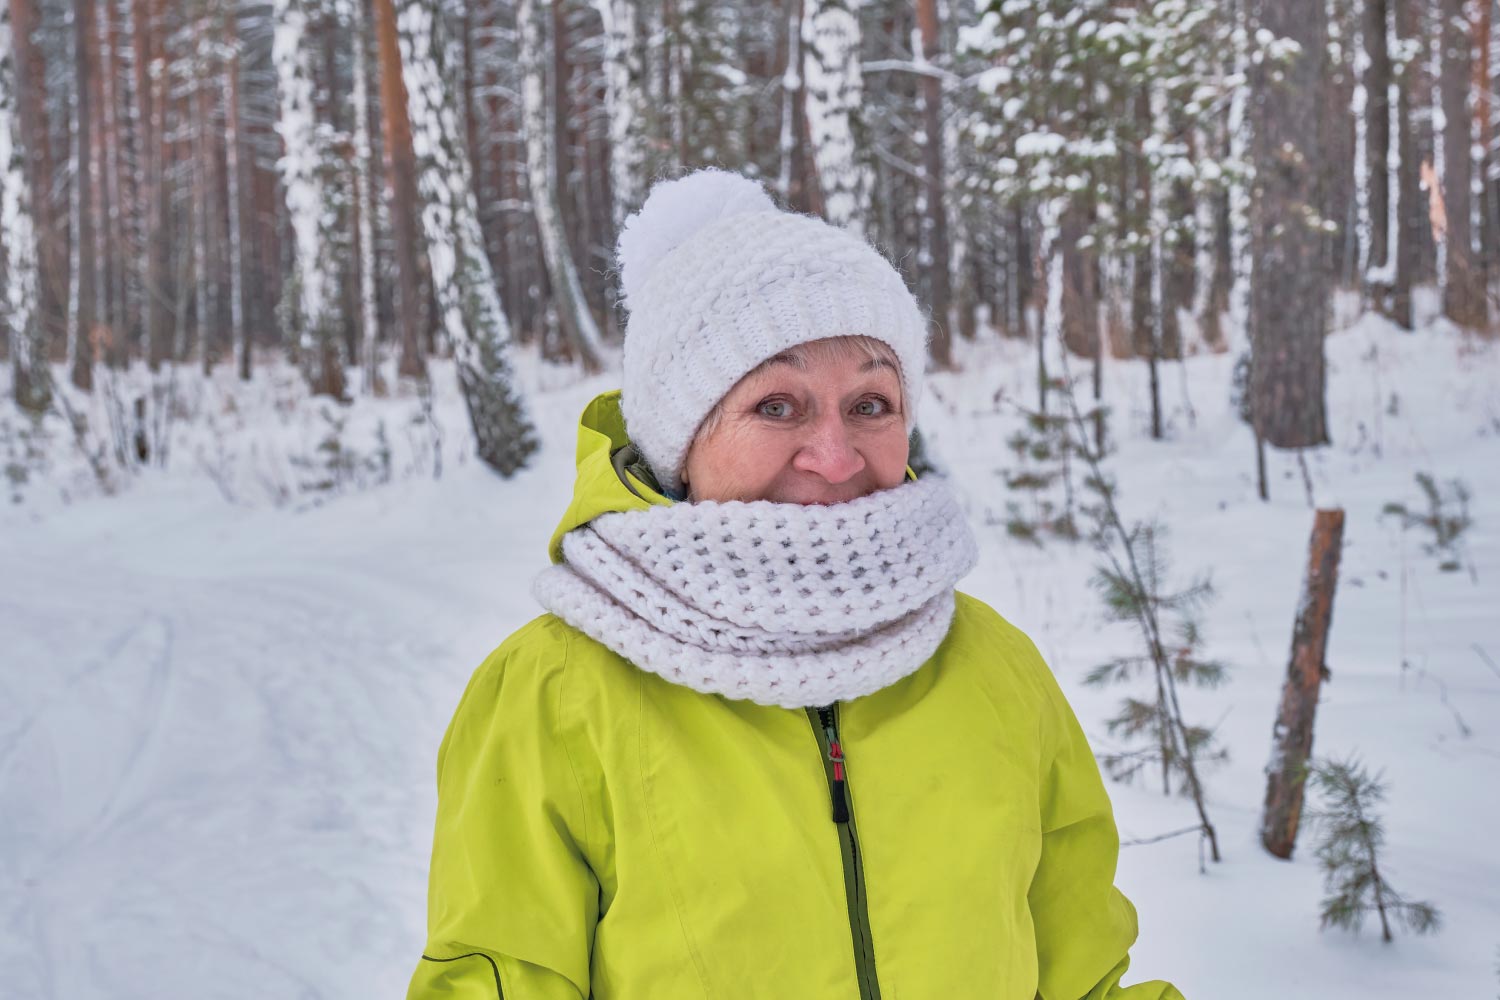 An older woman dressed warm and enjoying her time in the snow.